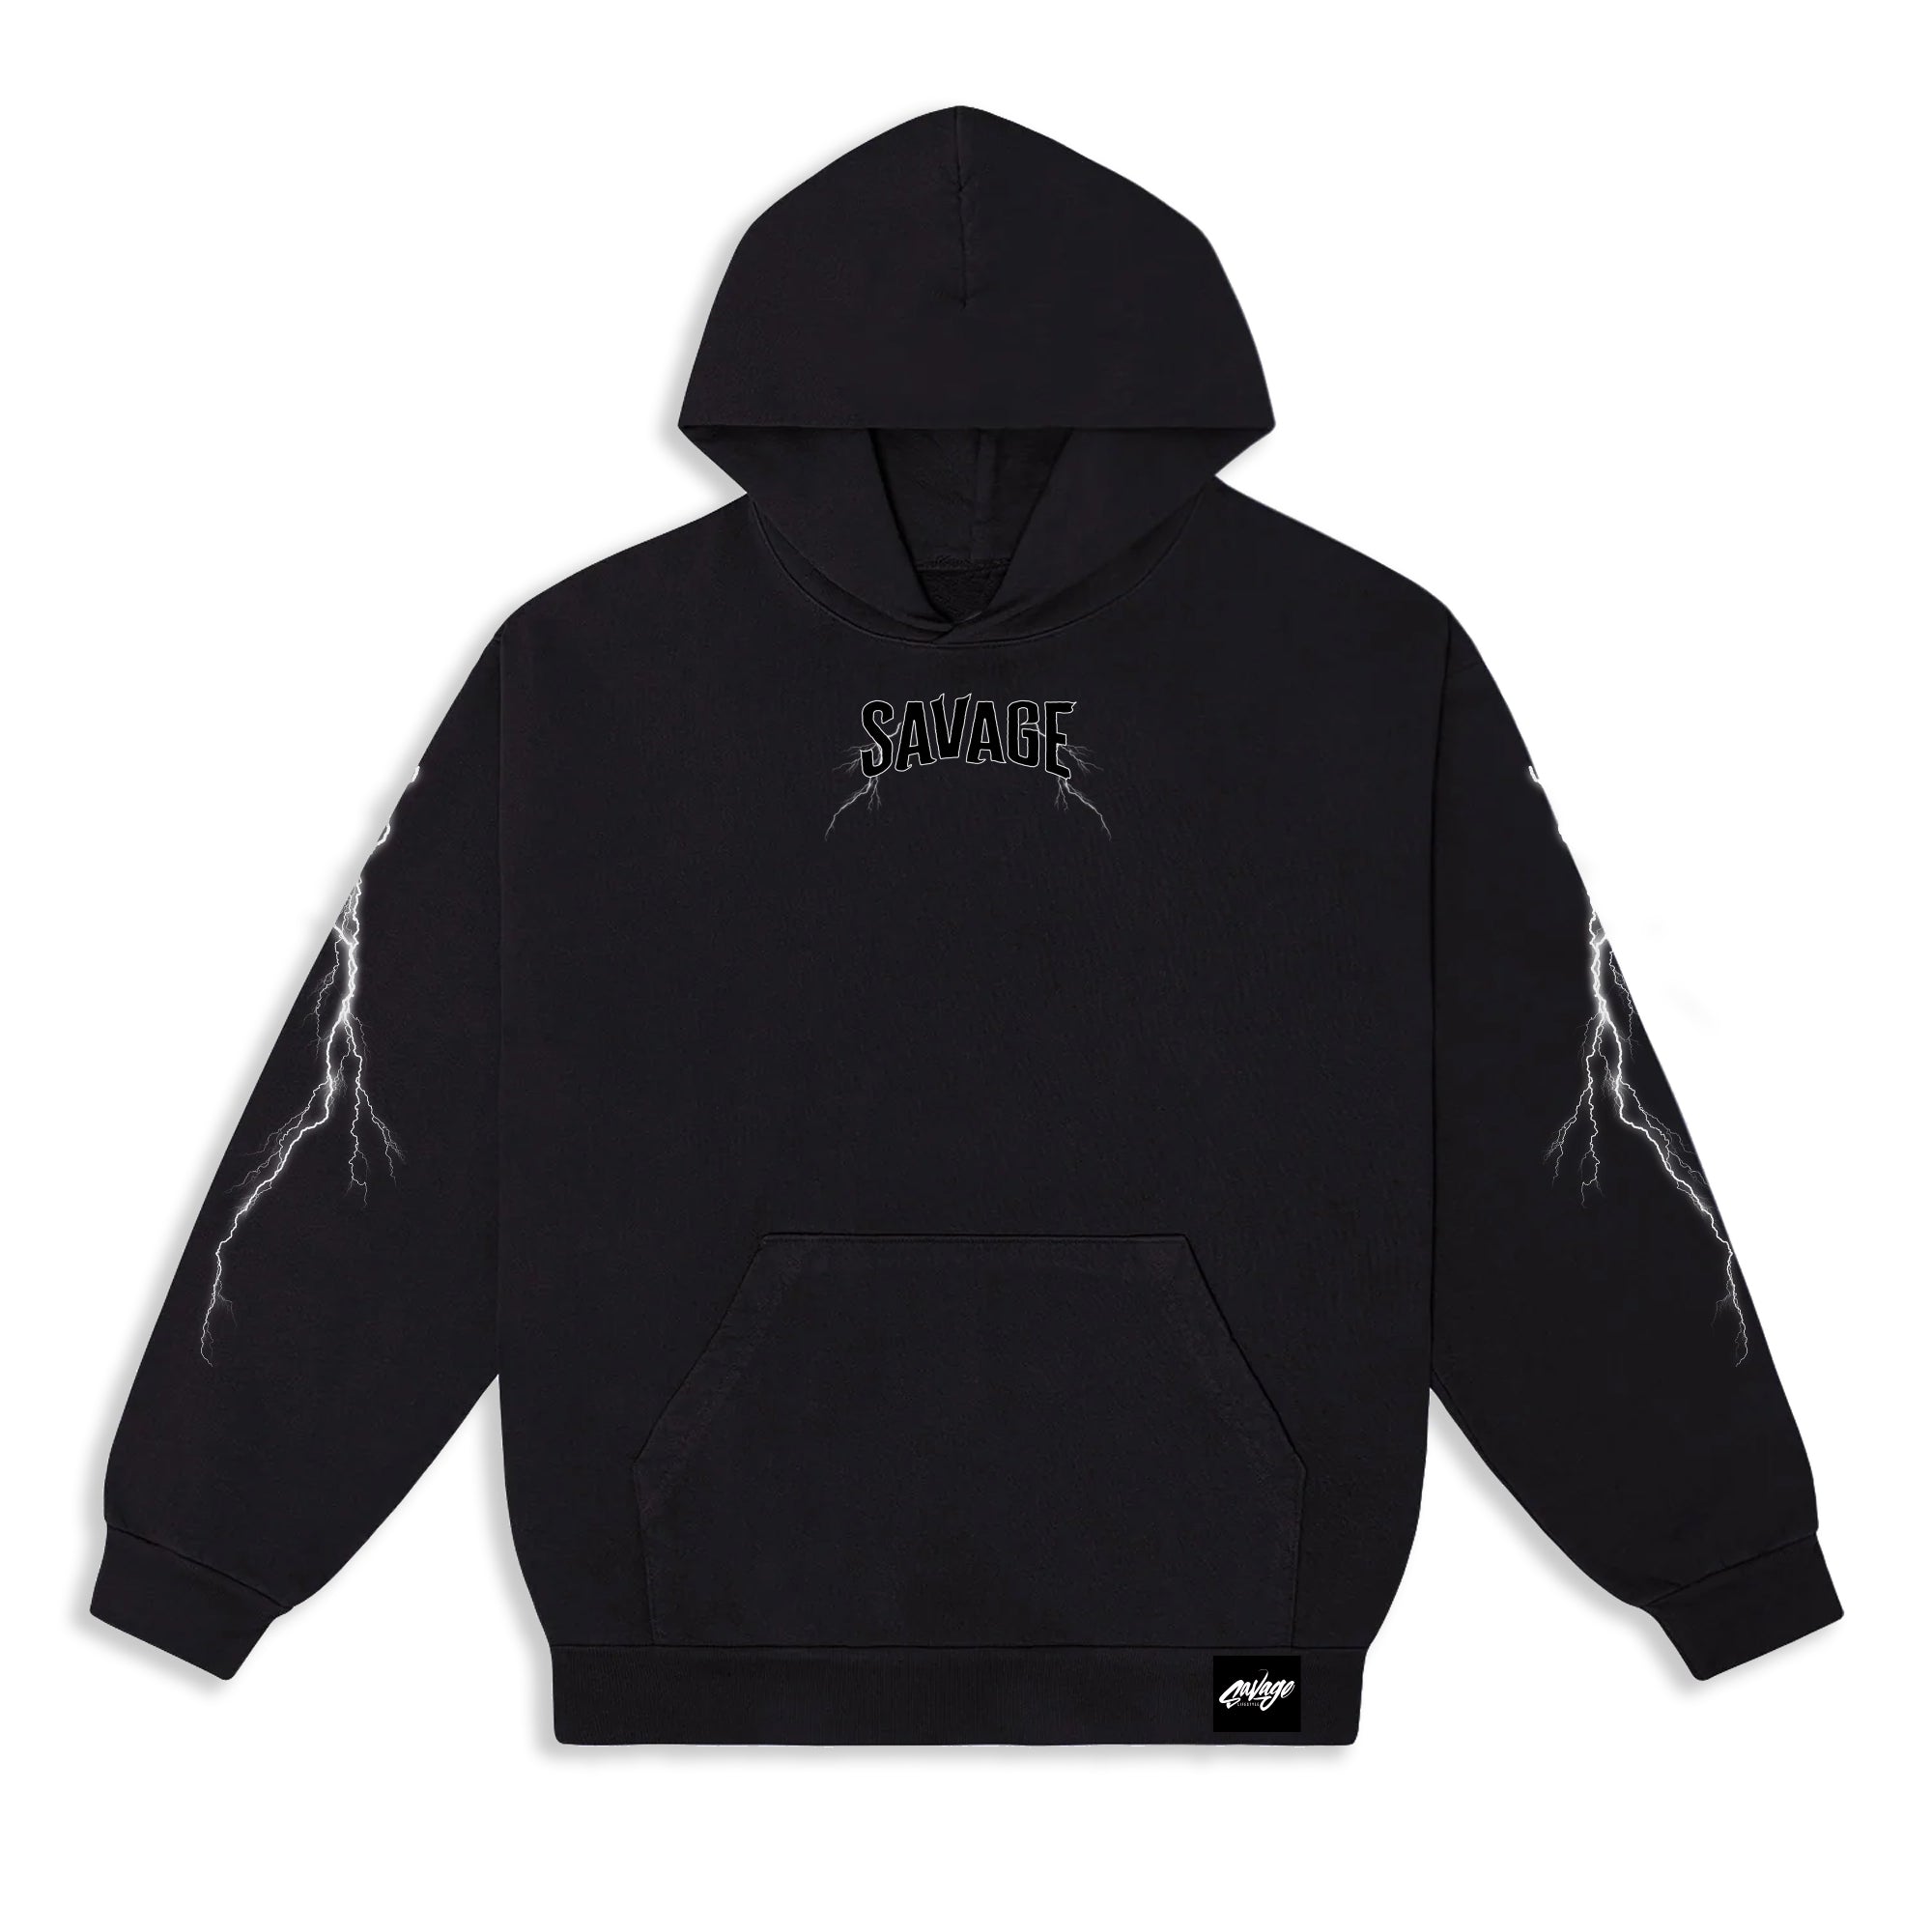 The Storm Oversized Heavyweight Hoodie